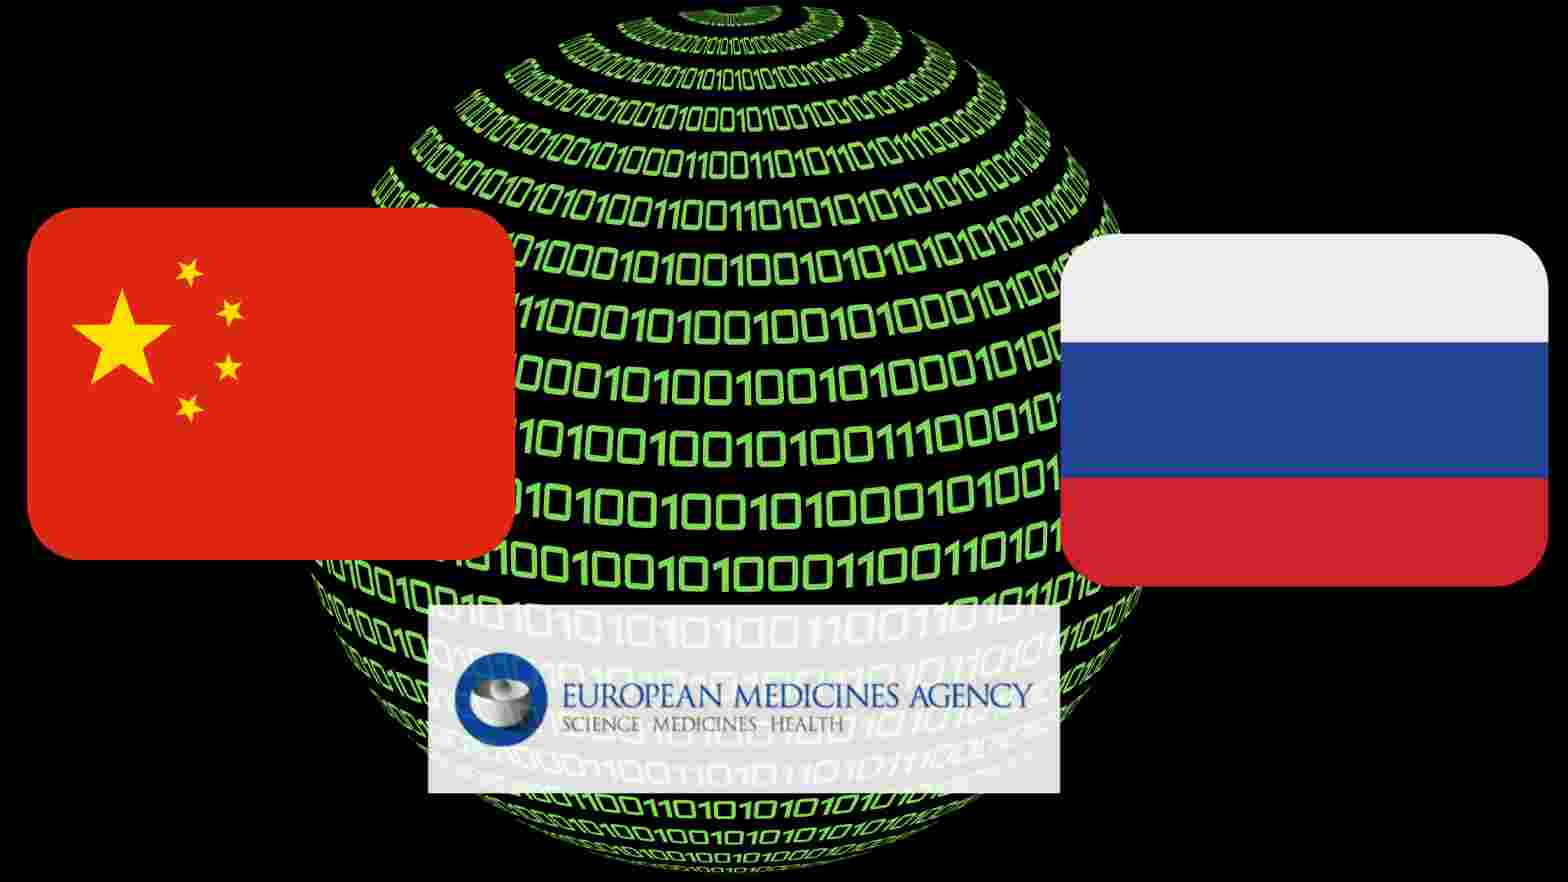 Chinese and Russian hackers targeted European Medicine Agency last year